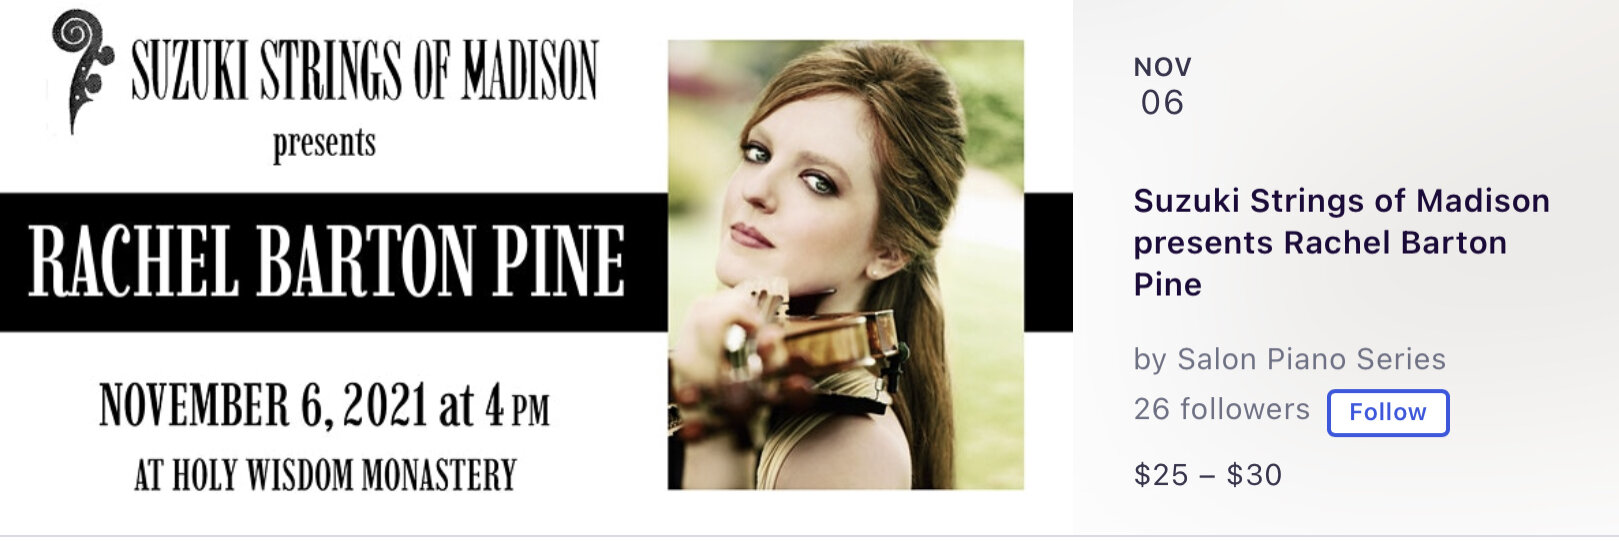 ORDER TICKETS AT: 30.00 is for SSM performer and immediate family ( parents /siblings)25.00 is per person all others .  https://www.eventbrite.com/e/suzuki-strings-of-madison-presents-rachel-barton-pine-tickets-162610407105